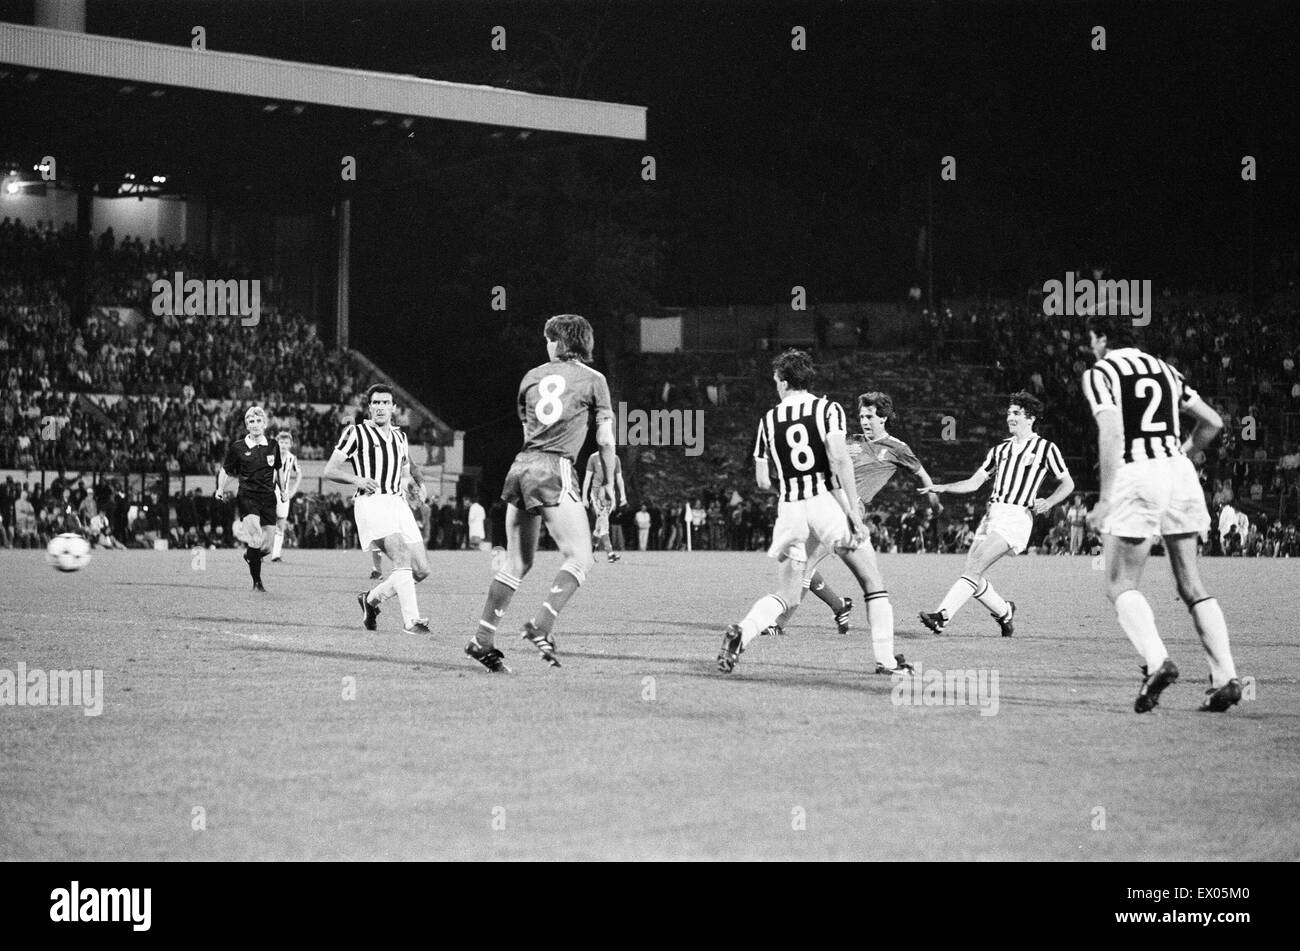 Juventus 1-0 Liverpool, 1985 European Cup Final, Heysel Stadium, Brussels, Belgium, Wednesday 29th May 1985. Match Action. Paolo Rossi (2nd Right) Stock Photo